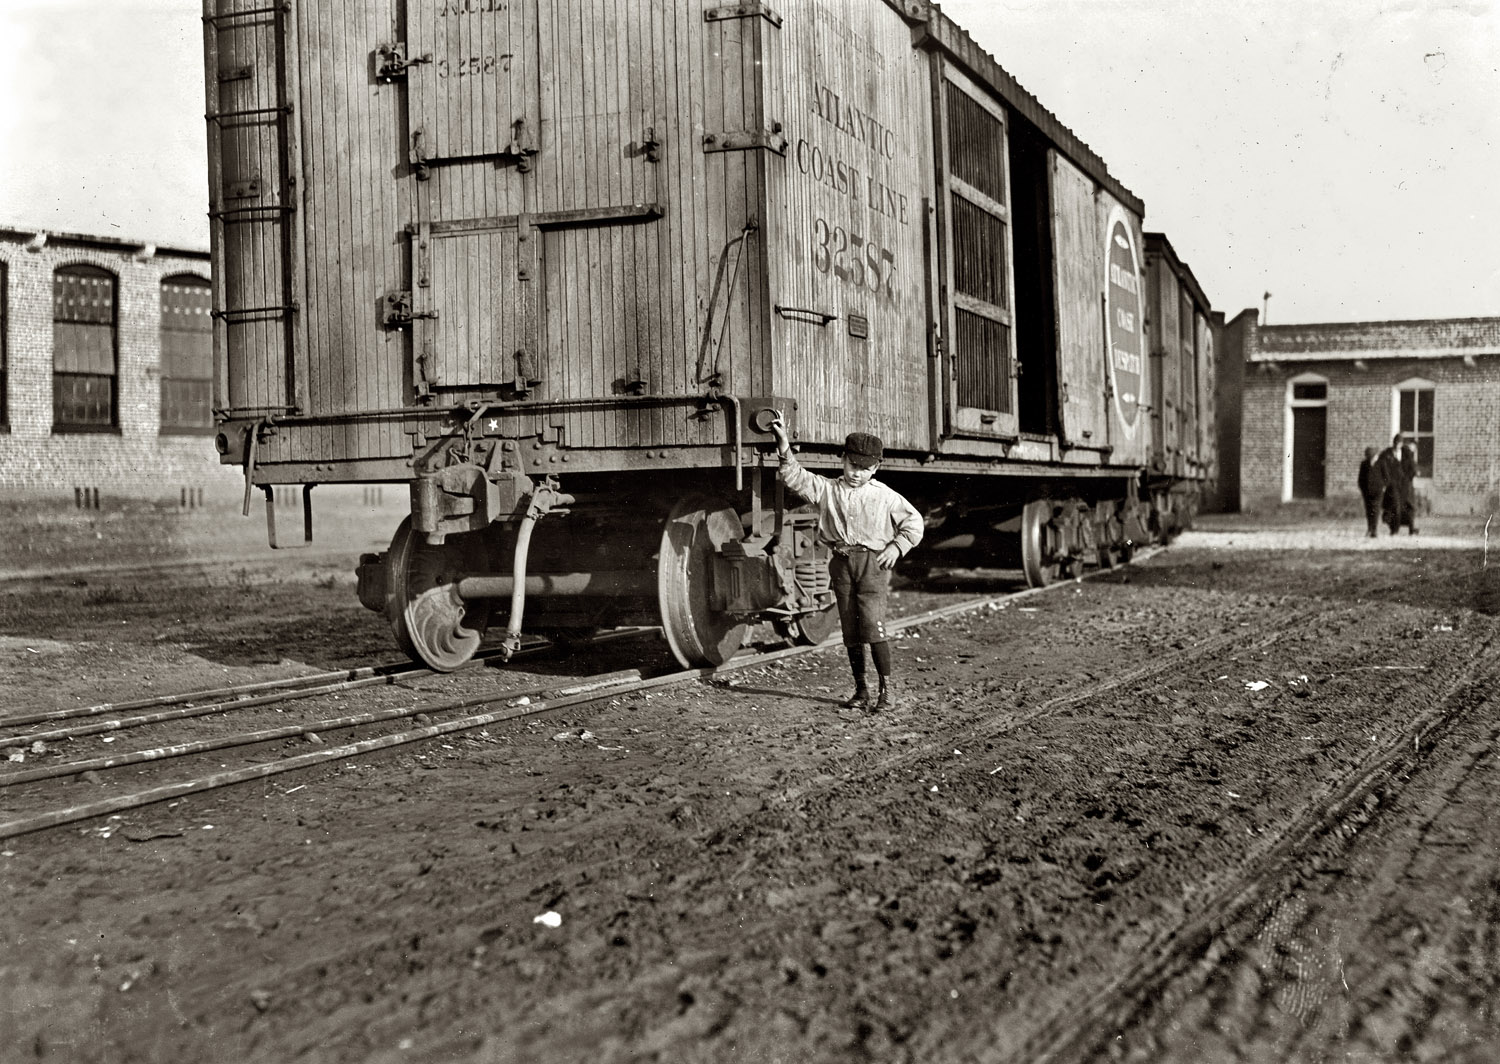 December 1908. Dillon, South Carolina. Johnnie, works at Maple Mills. 8 years old. Said "Ain't got no last name" when asked for it. Beginning to "help sister spin." View full size. Photograph and caption by Lewis Wickes Hine.